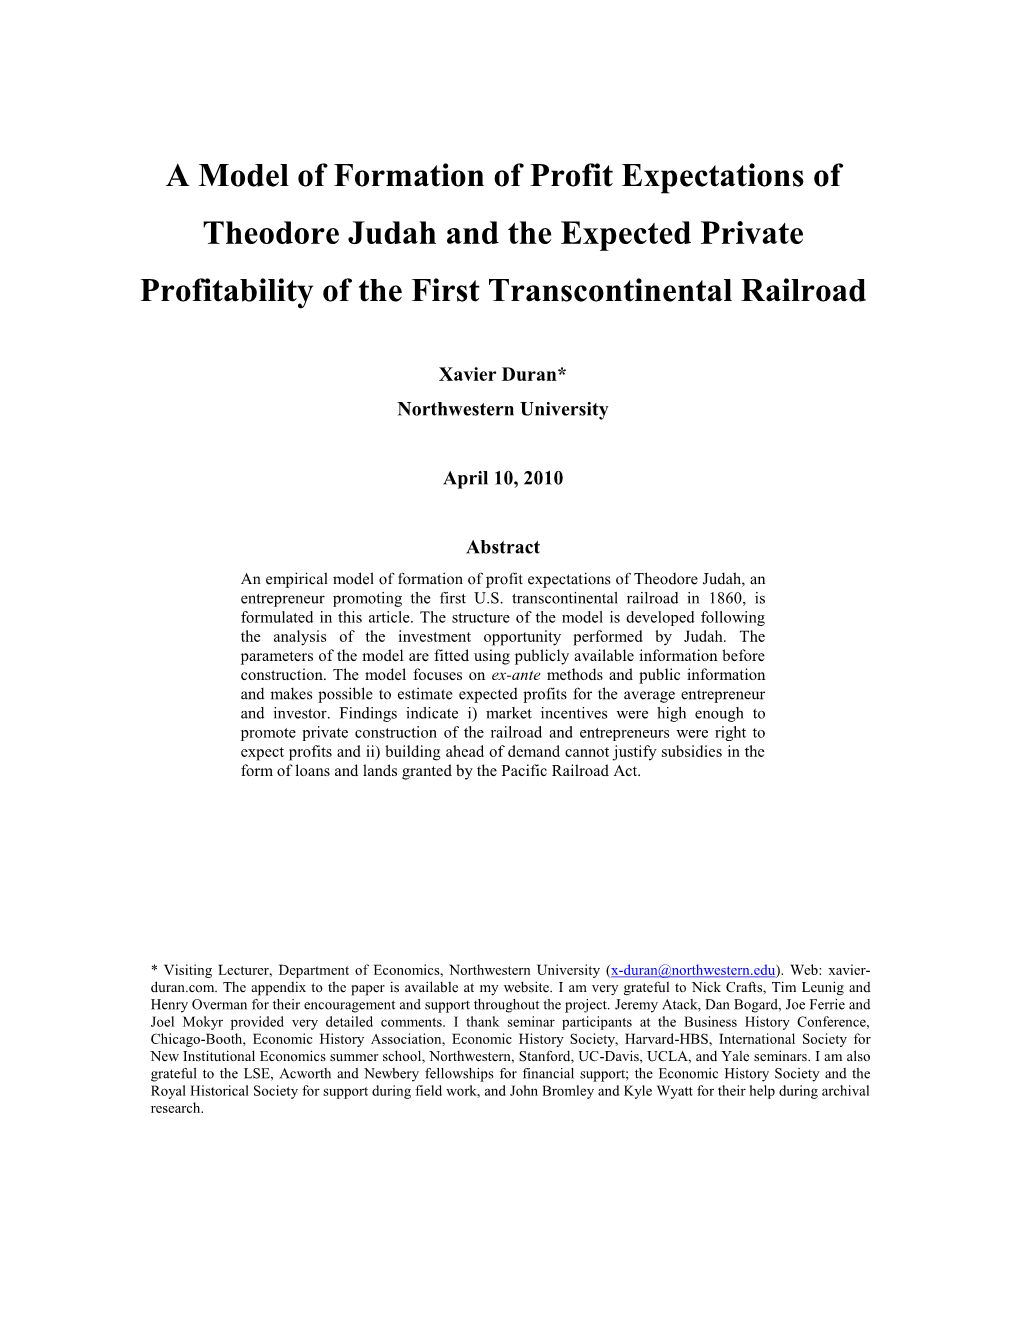 A Model of Formation of Profit Expectations of Theodore Judah and the Expected Private Profitability of the First Transcontinental Railroad